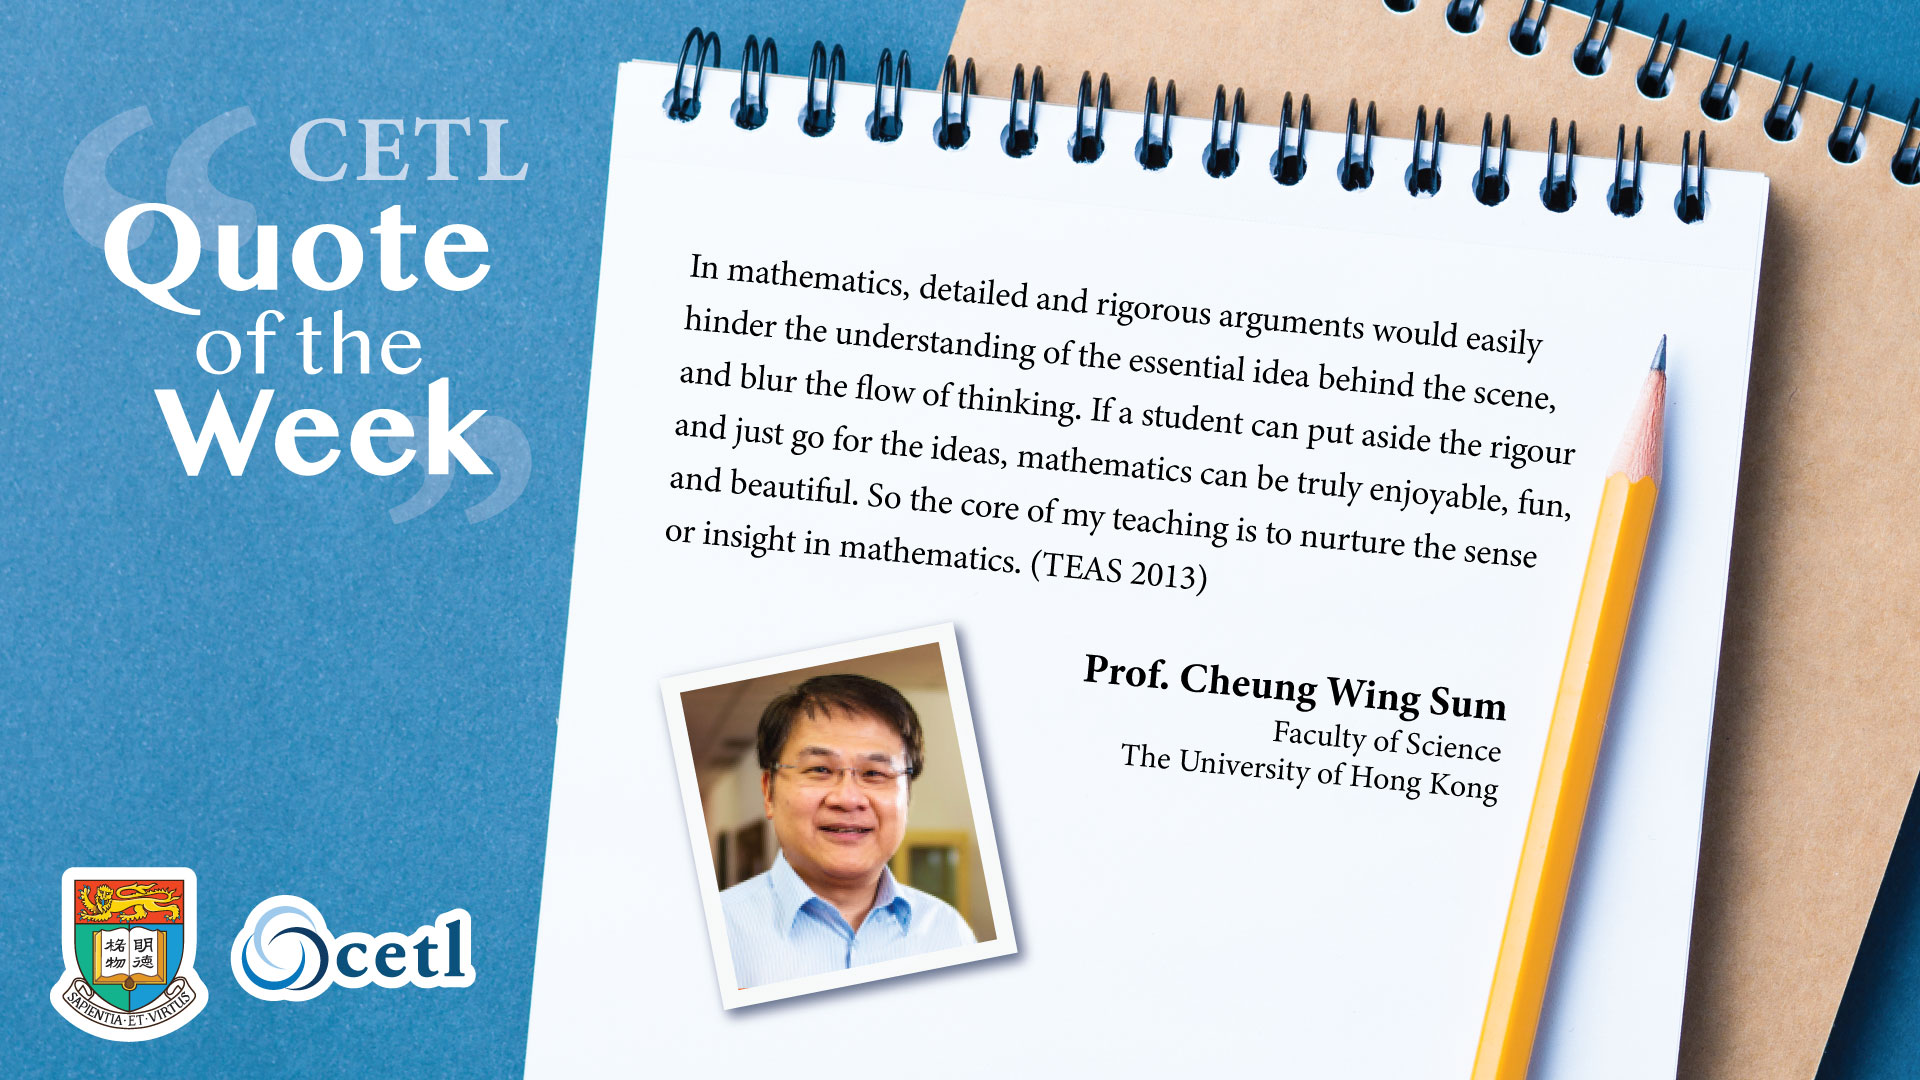 Prof. Cheung Wing Sum - In mathematics, detailed and rigorous arguments would easily hinder the understanding of the essential idea behind the scene, and blur the flow of thinking. If a student can put aside the rigour and just go for the ideas, mathematics can be truly enjoyable, fun, and beautiful. So the core of my teaching is to nurture the sense of insight in mathematics.